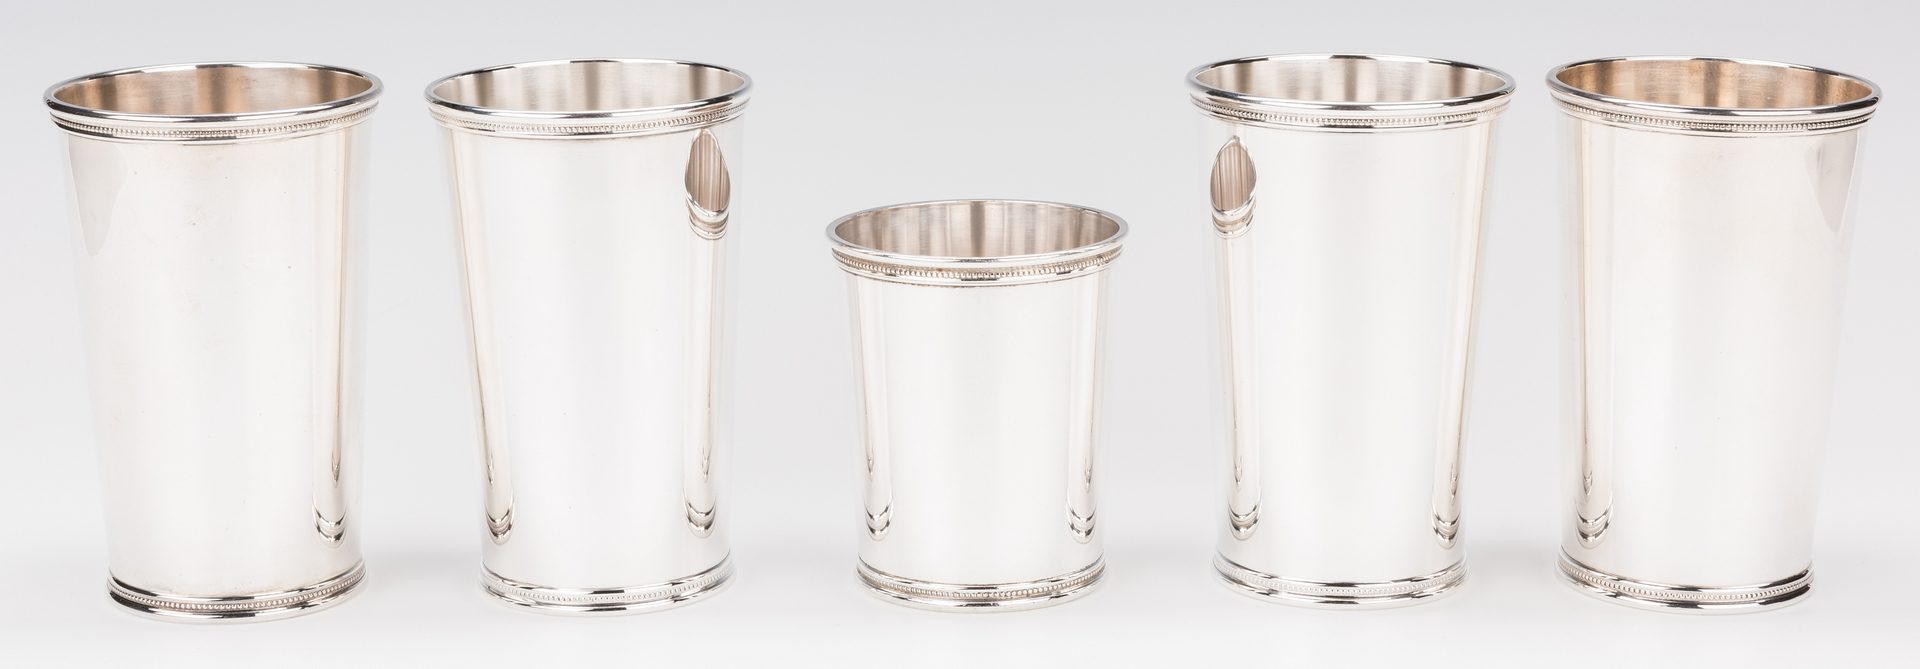 Lot 398: 5 Scearce Presidential Sterling Julep Cups  – Nixon Administration